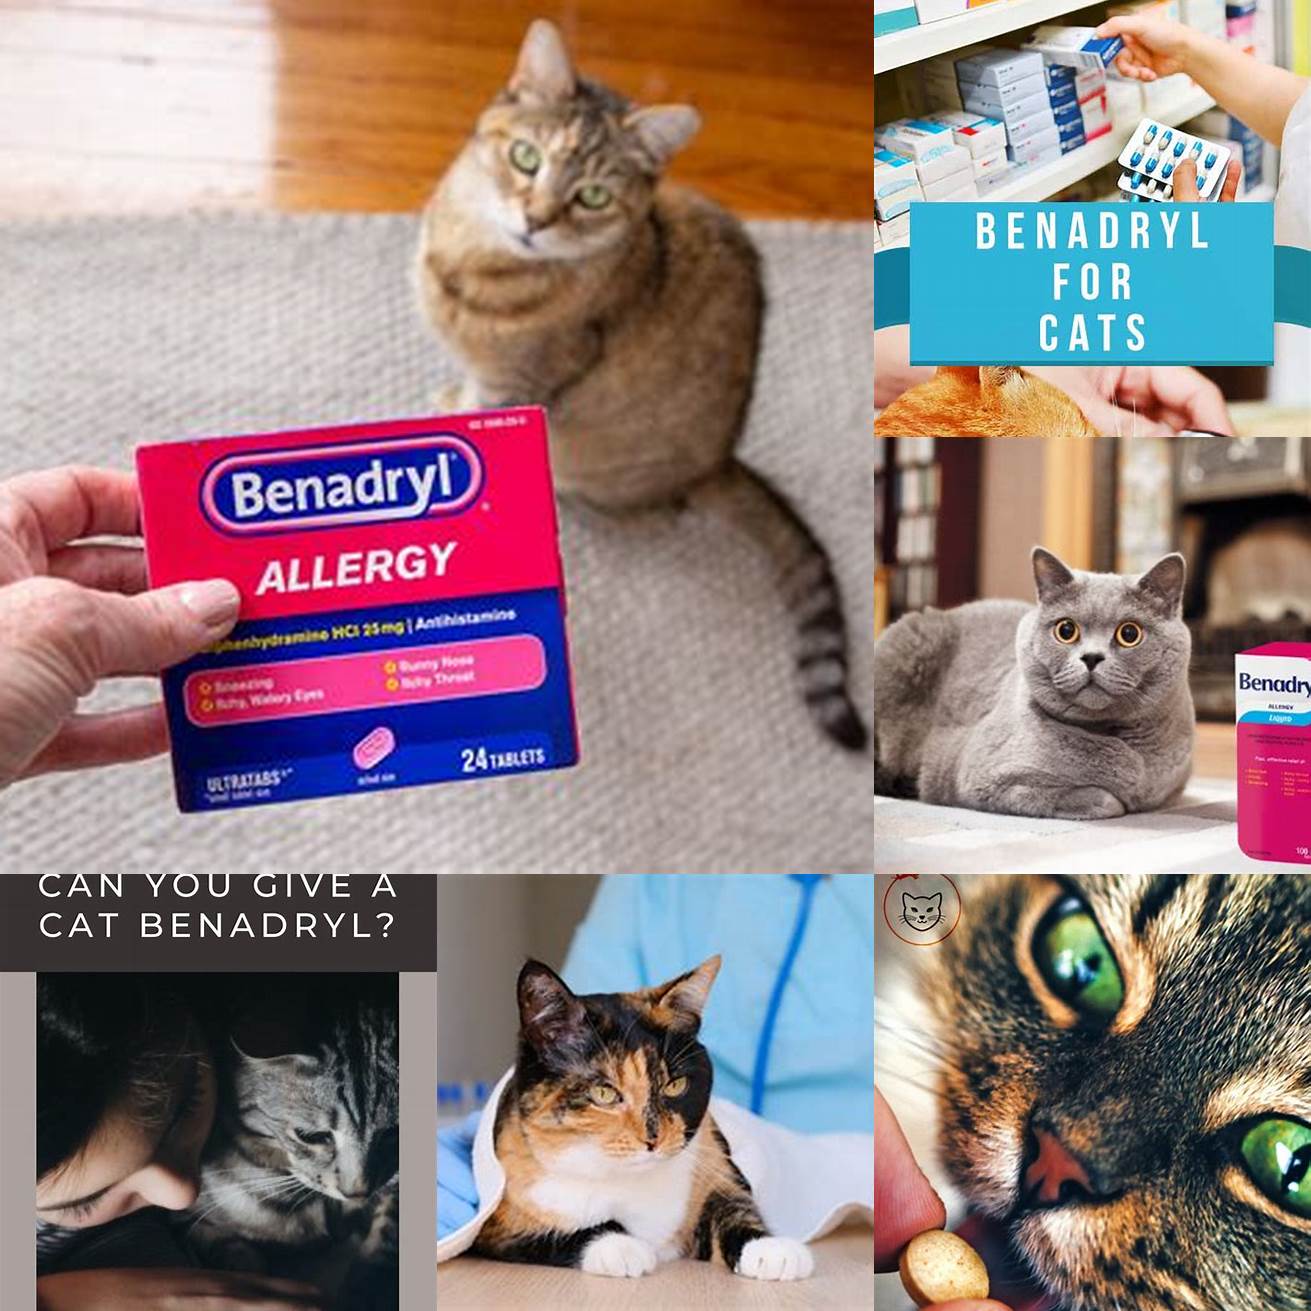 Avoid Giving Benadryl to Cats with a History of Allergic Reactions